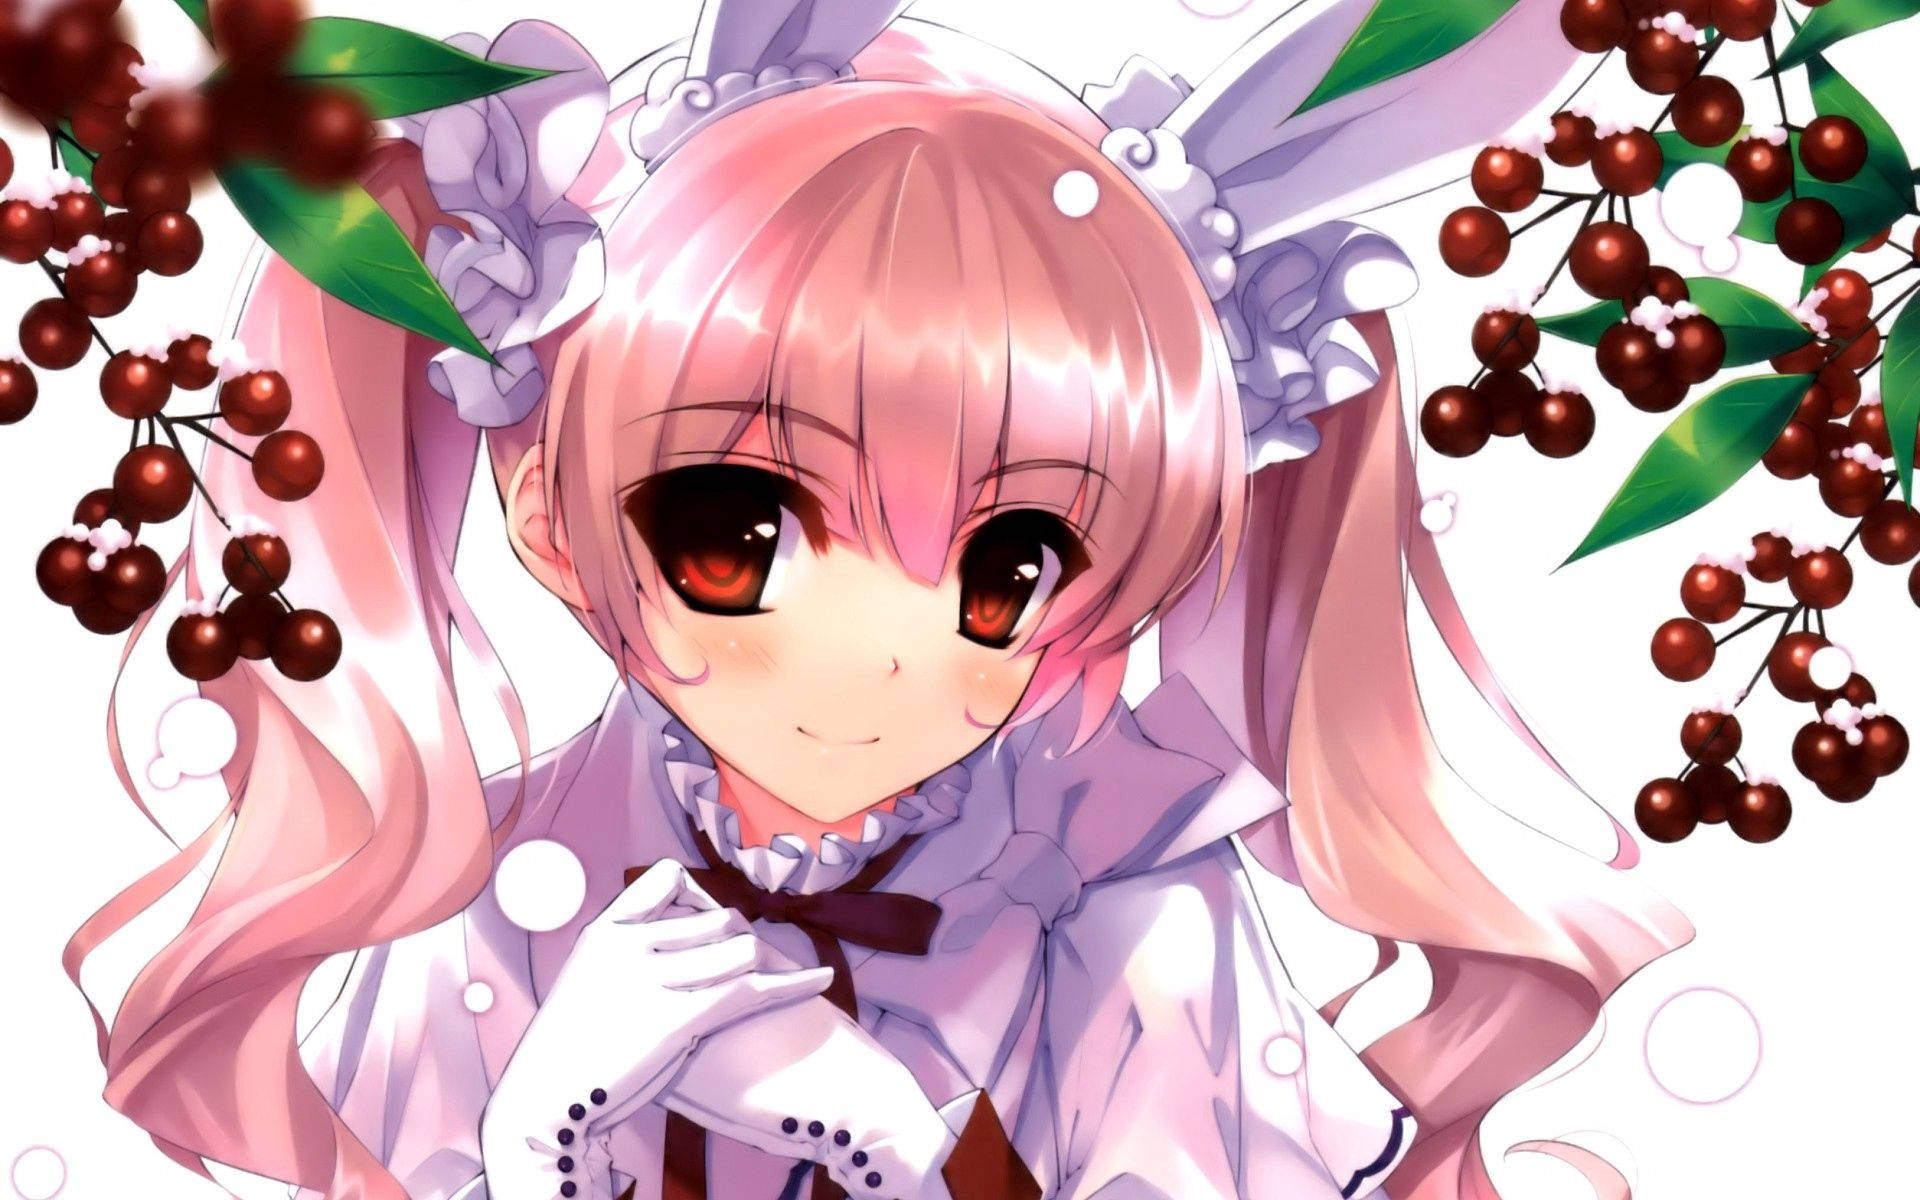 Cute Anime Girl Surrounded By Cherries Wallpaper